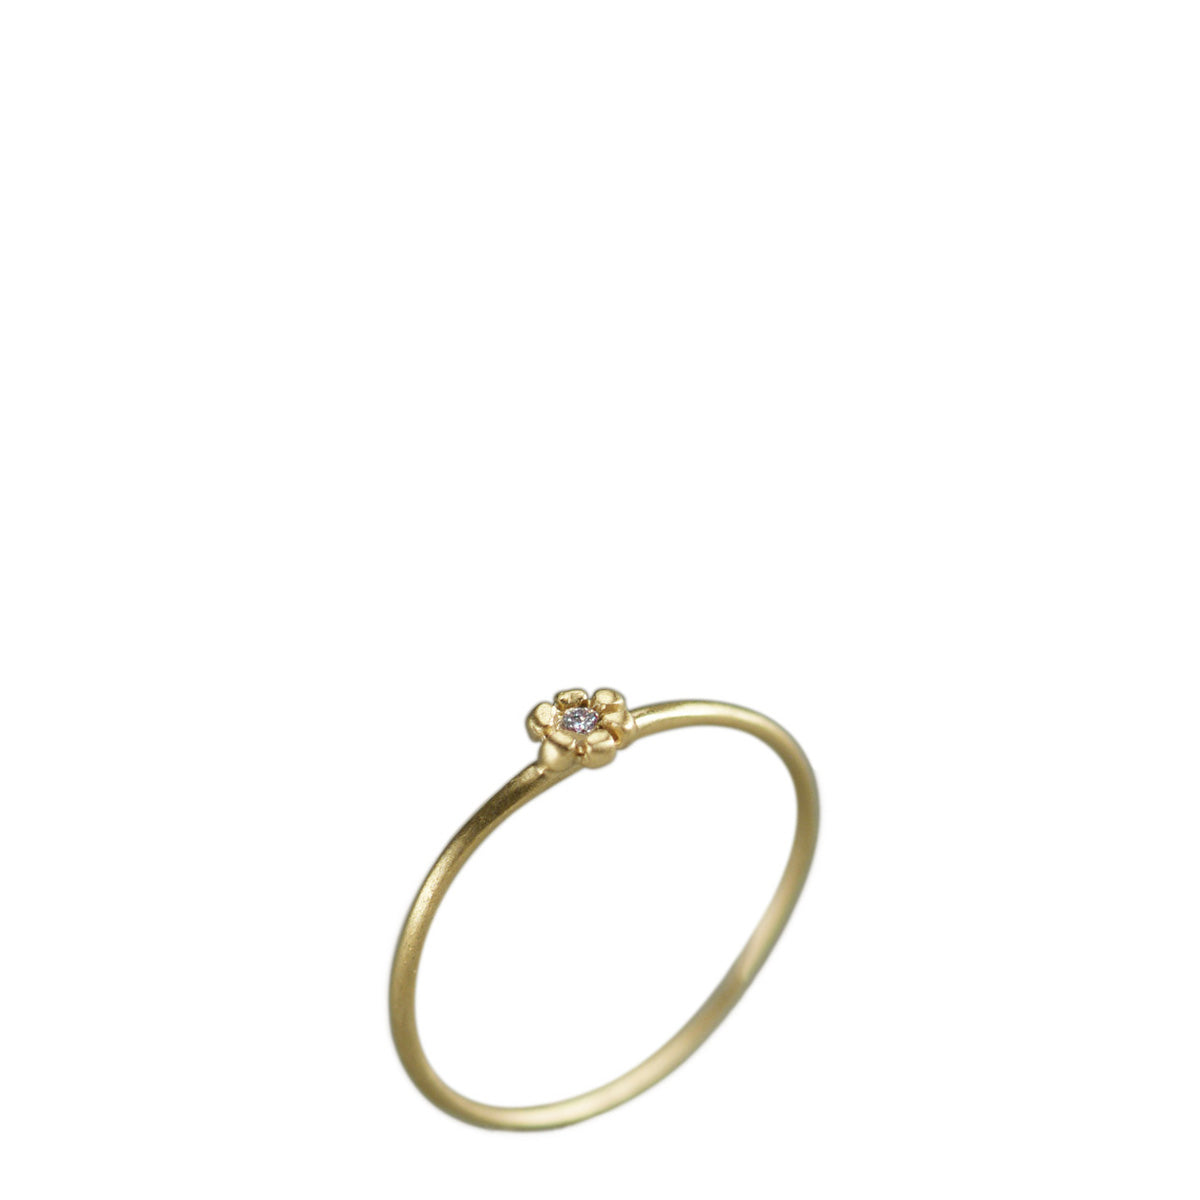 10K Gold Tiny Flower Ring with Diamond